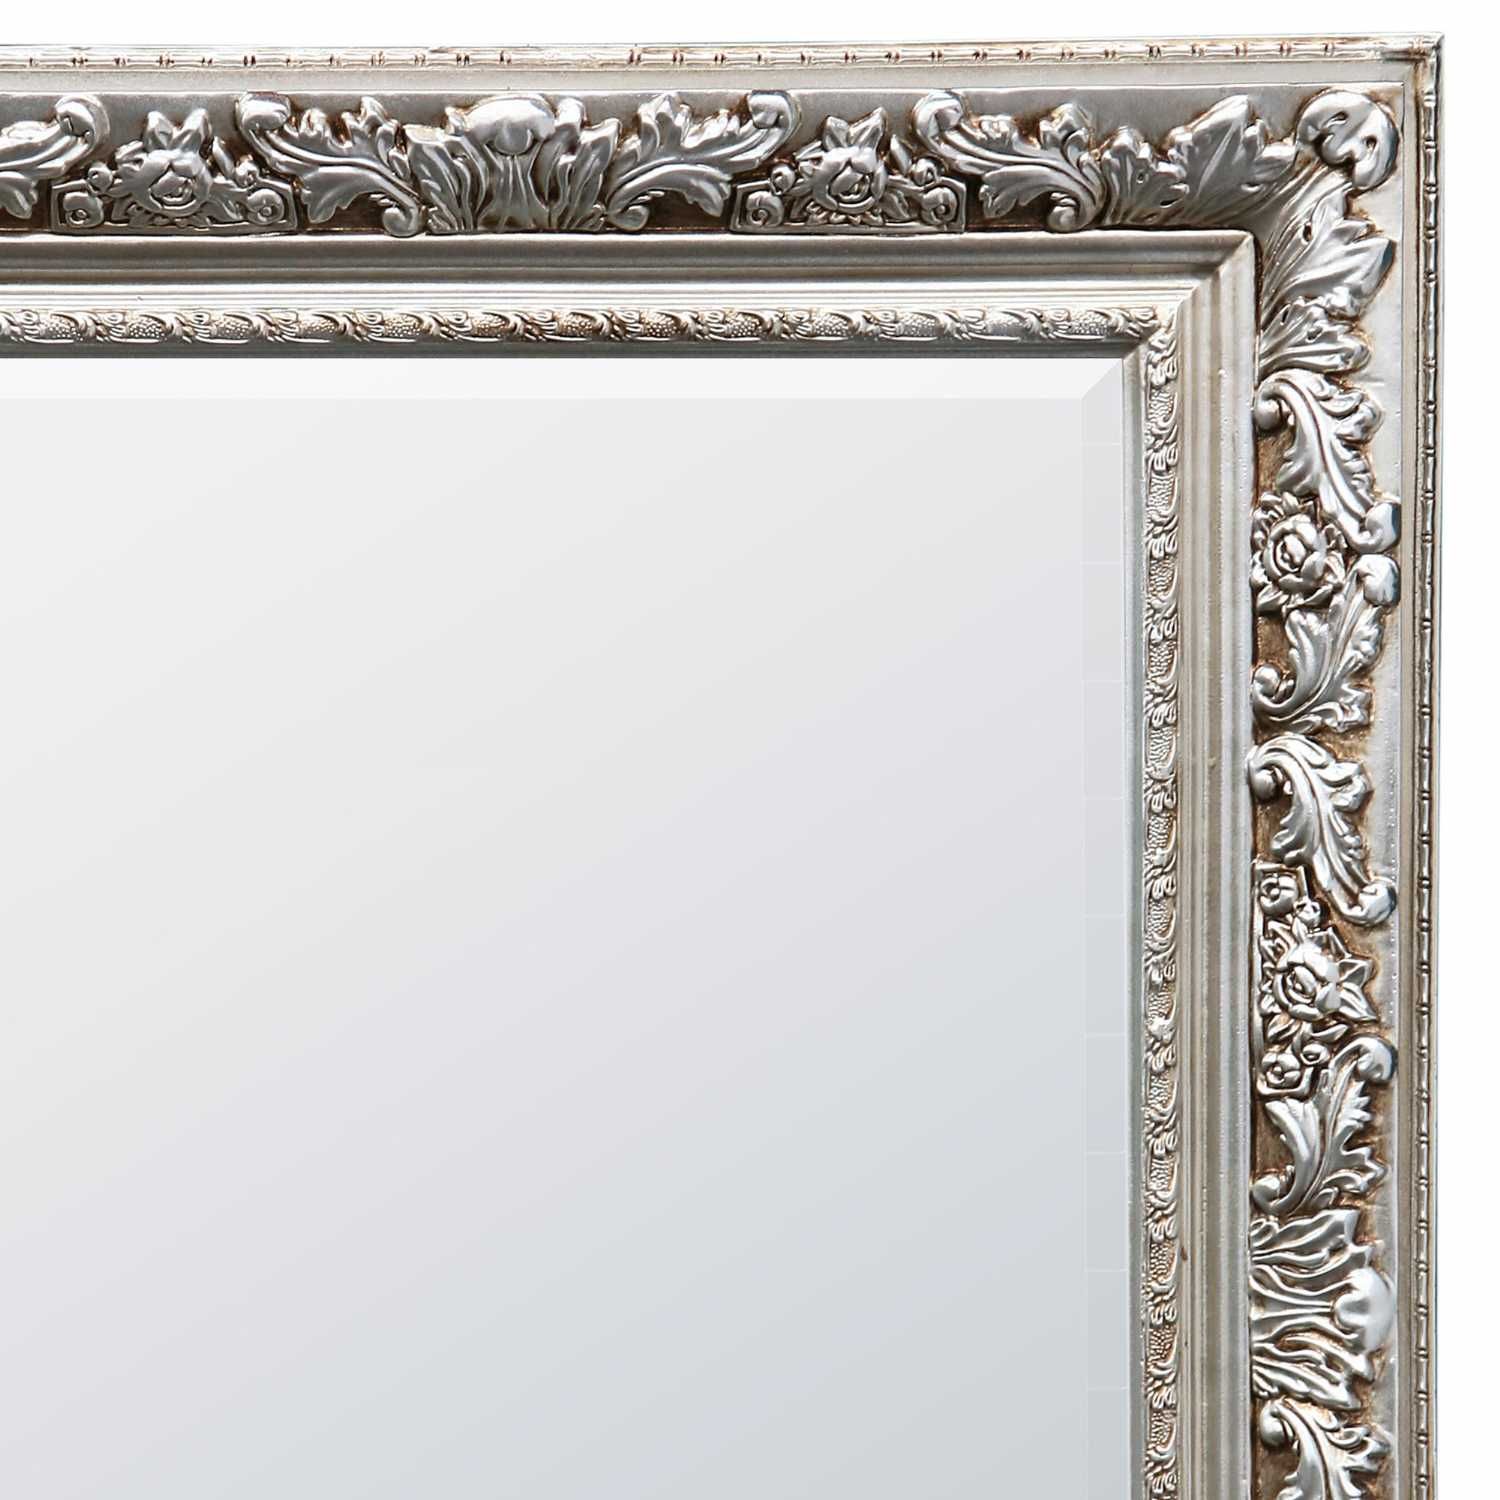 Antique Silver Decorative Leaf Design Framed Bevelled Wall Mirror Inside Butterfly Gold Leaf Wall Mirrors (View 12 of 15)